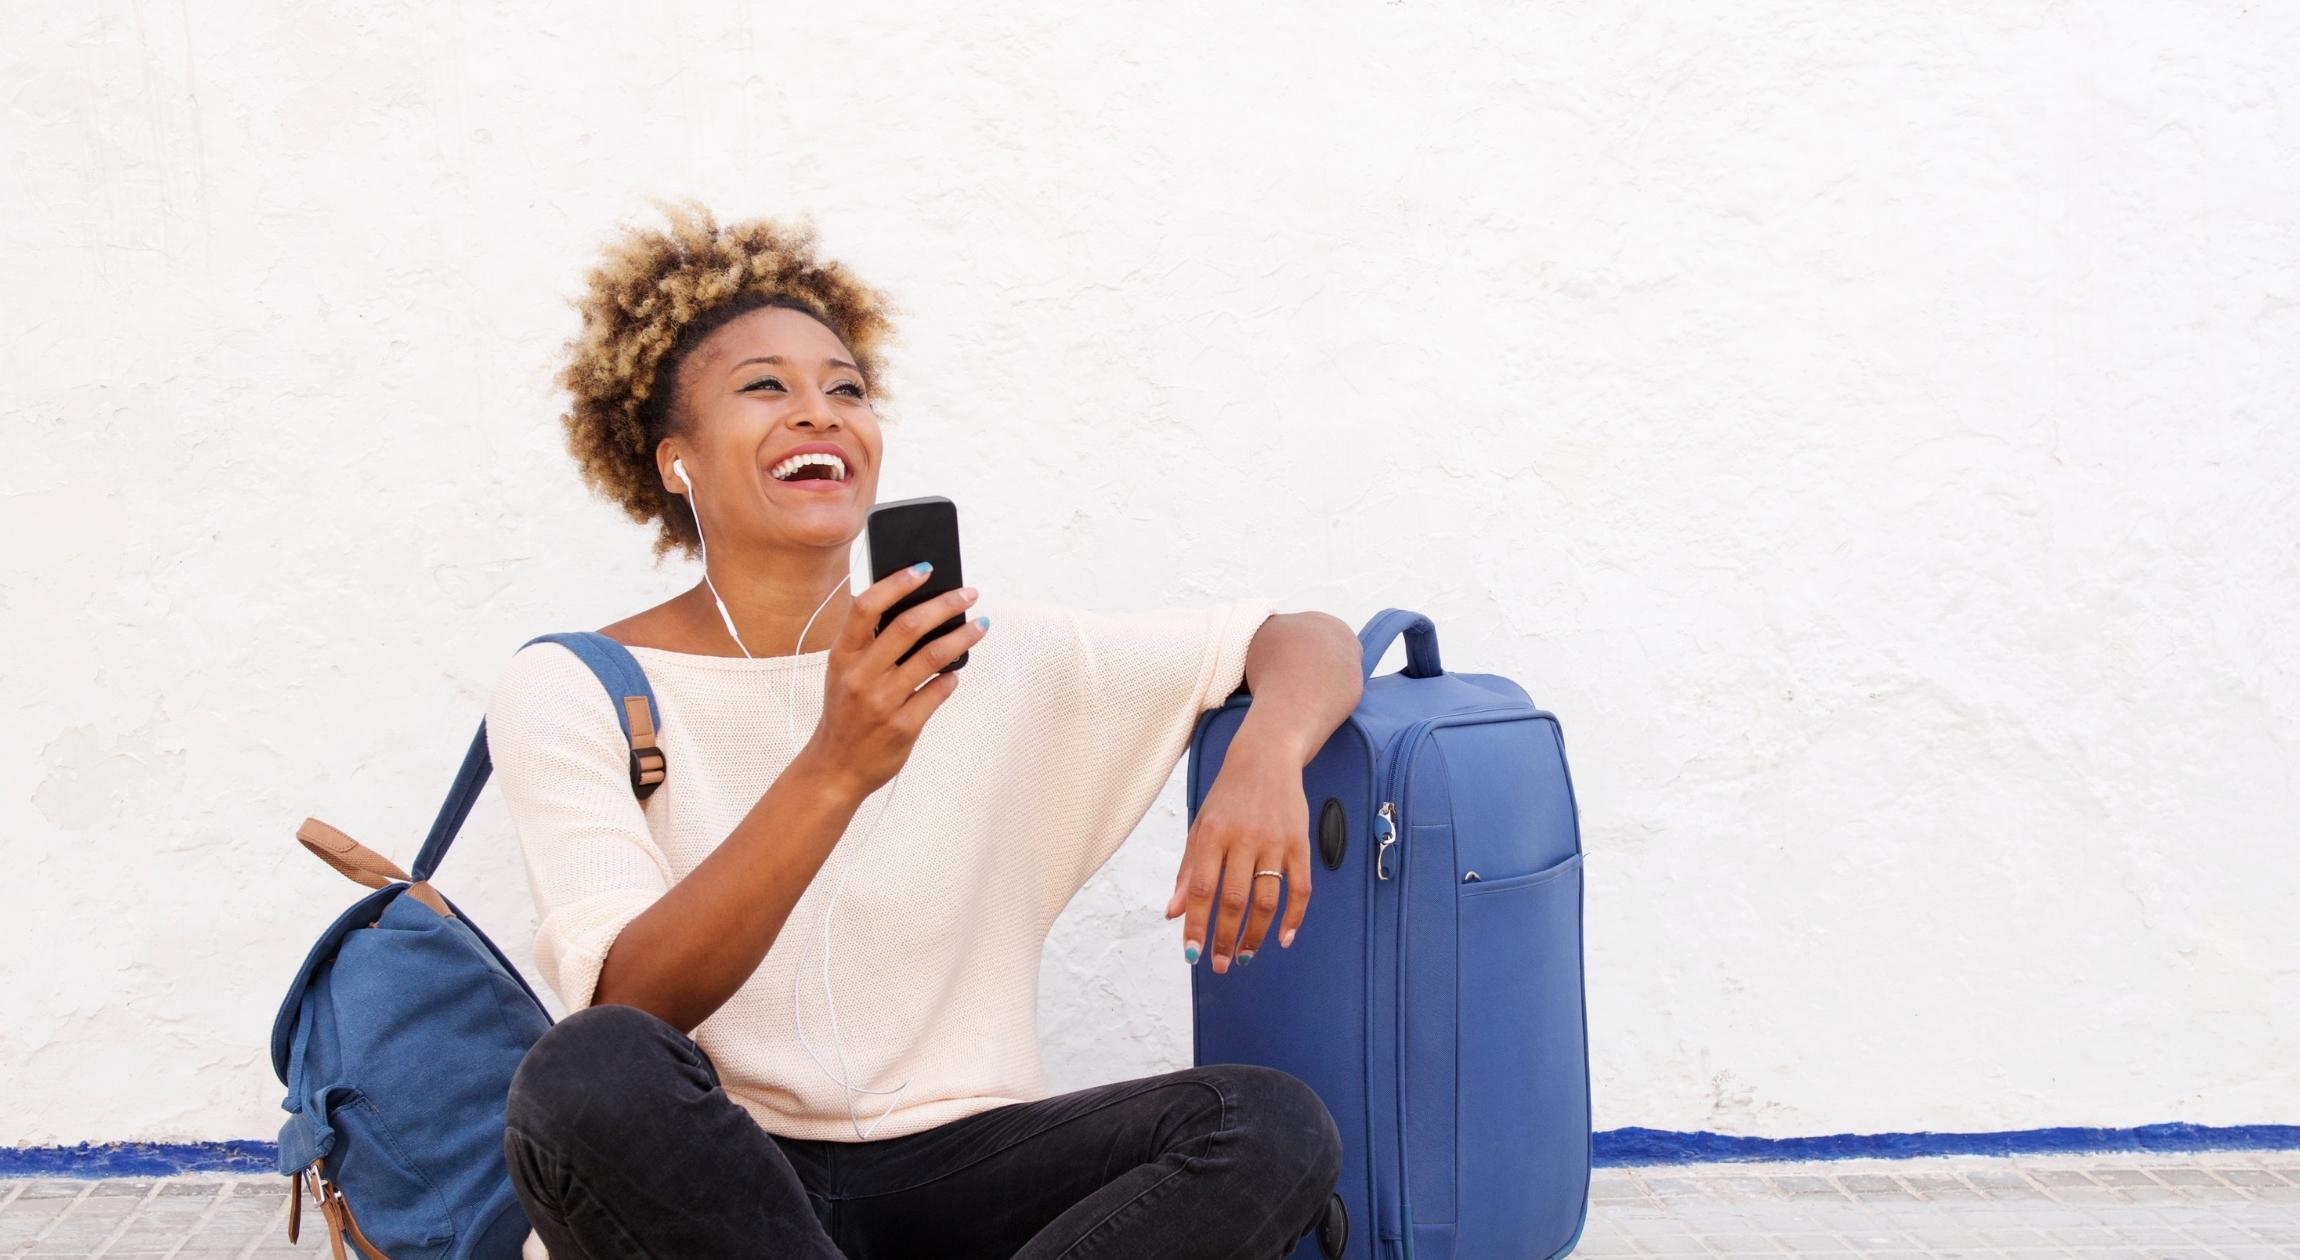 A Black woman sitting on the ground with two pieces of luggage holding on to a cell phone